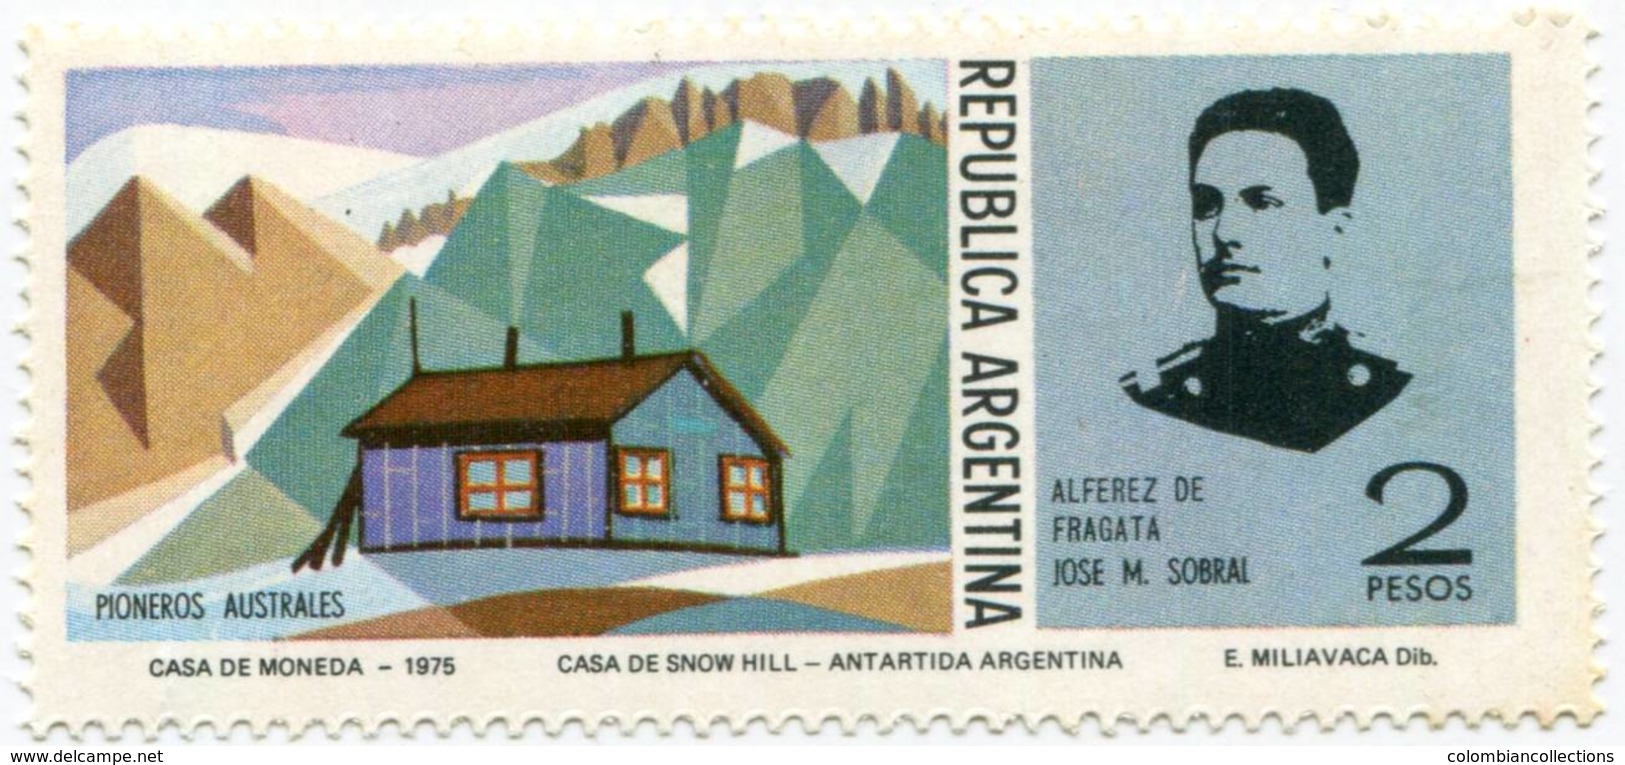 Lote A11, Argentina, 1975, Sello, Stamp, 5 V, Pioneros Australes, Austral Pioneers, Mountain, Boat - Nuevos